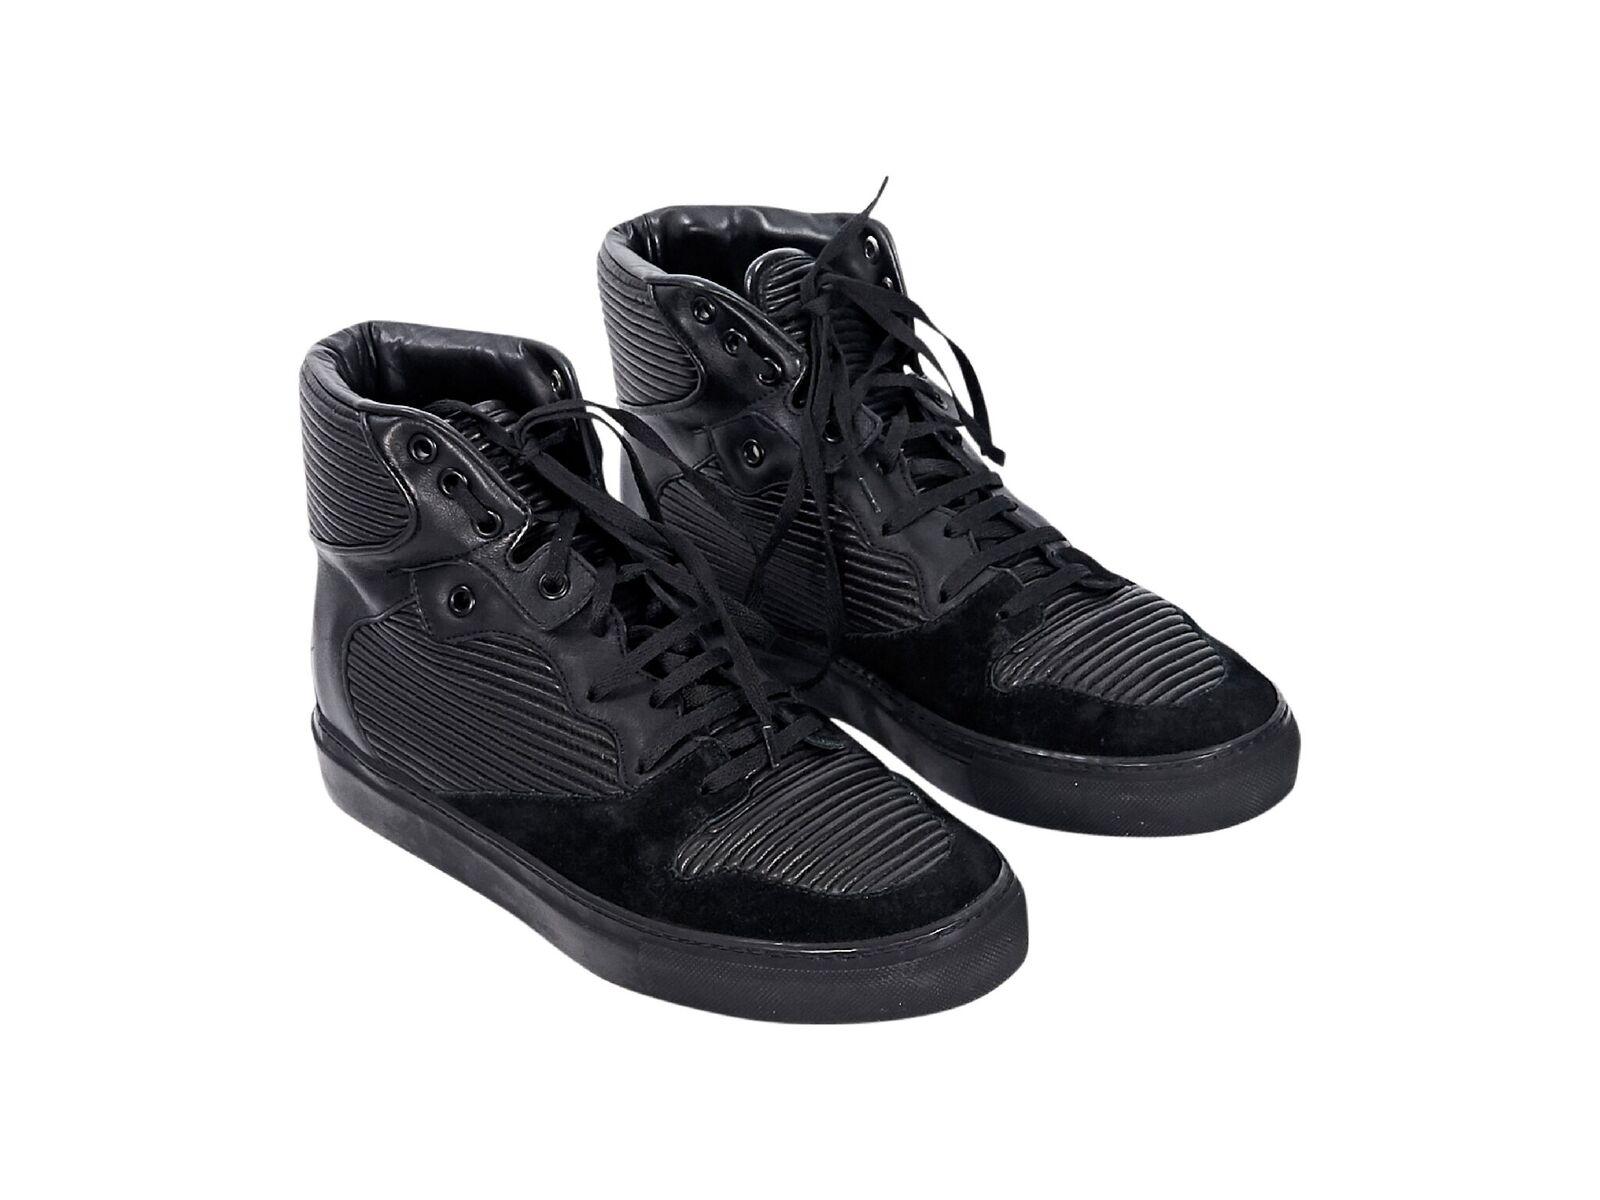 Product details:  Black ribbed leather high-top sneakers by Balenciaga.  Trimmed with suede.  Lace-up closure.  Round toe.  
Condition: Pre-owned. New with box.
Est. Retail $ 625.00